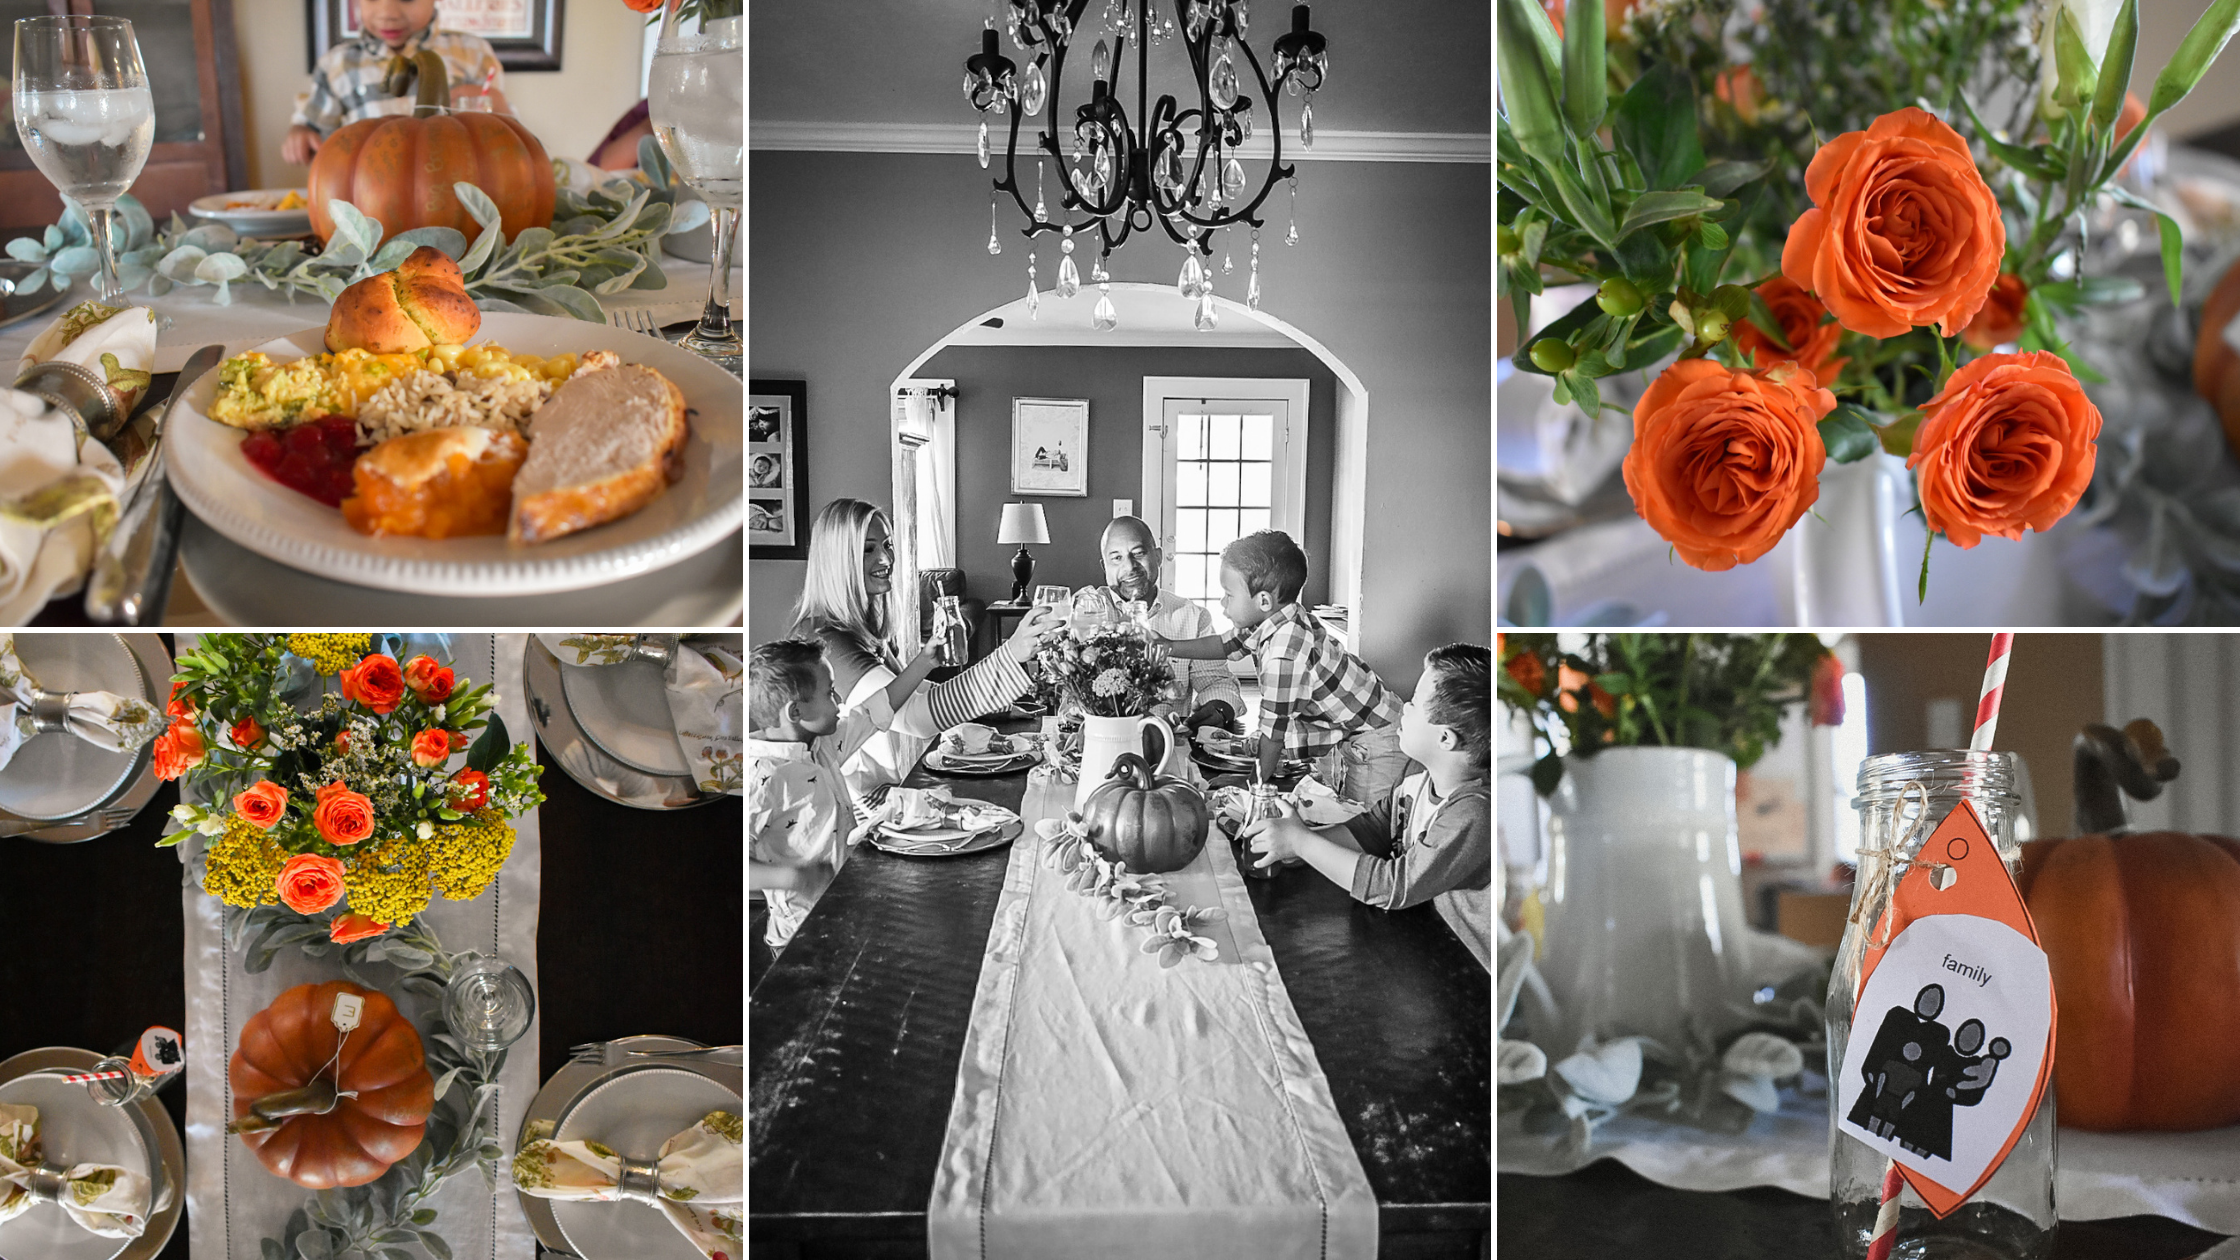 A family toasting their first Thanksgiving as a family of 5, a photo of the Thanksgiving meal, the tablescape, a beautiful orange floral arrangement, and table decor with kid's artwork that says "family"